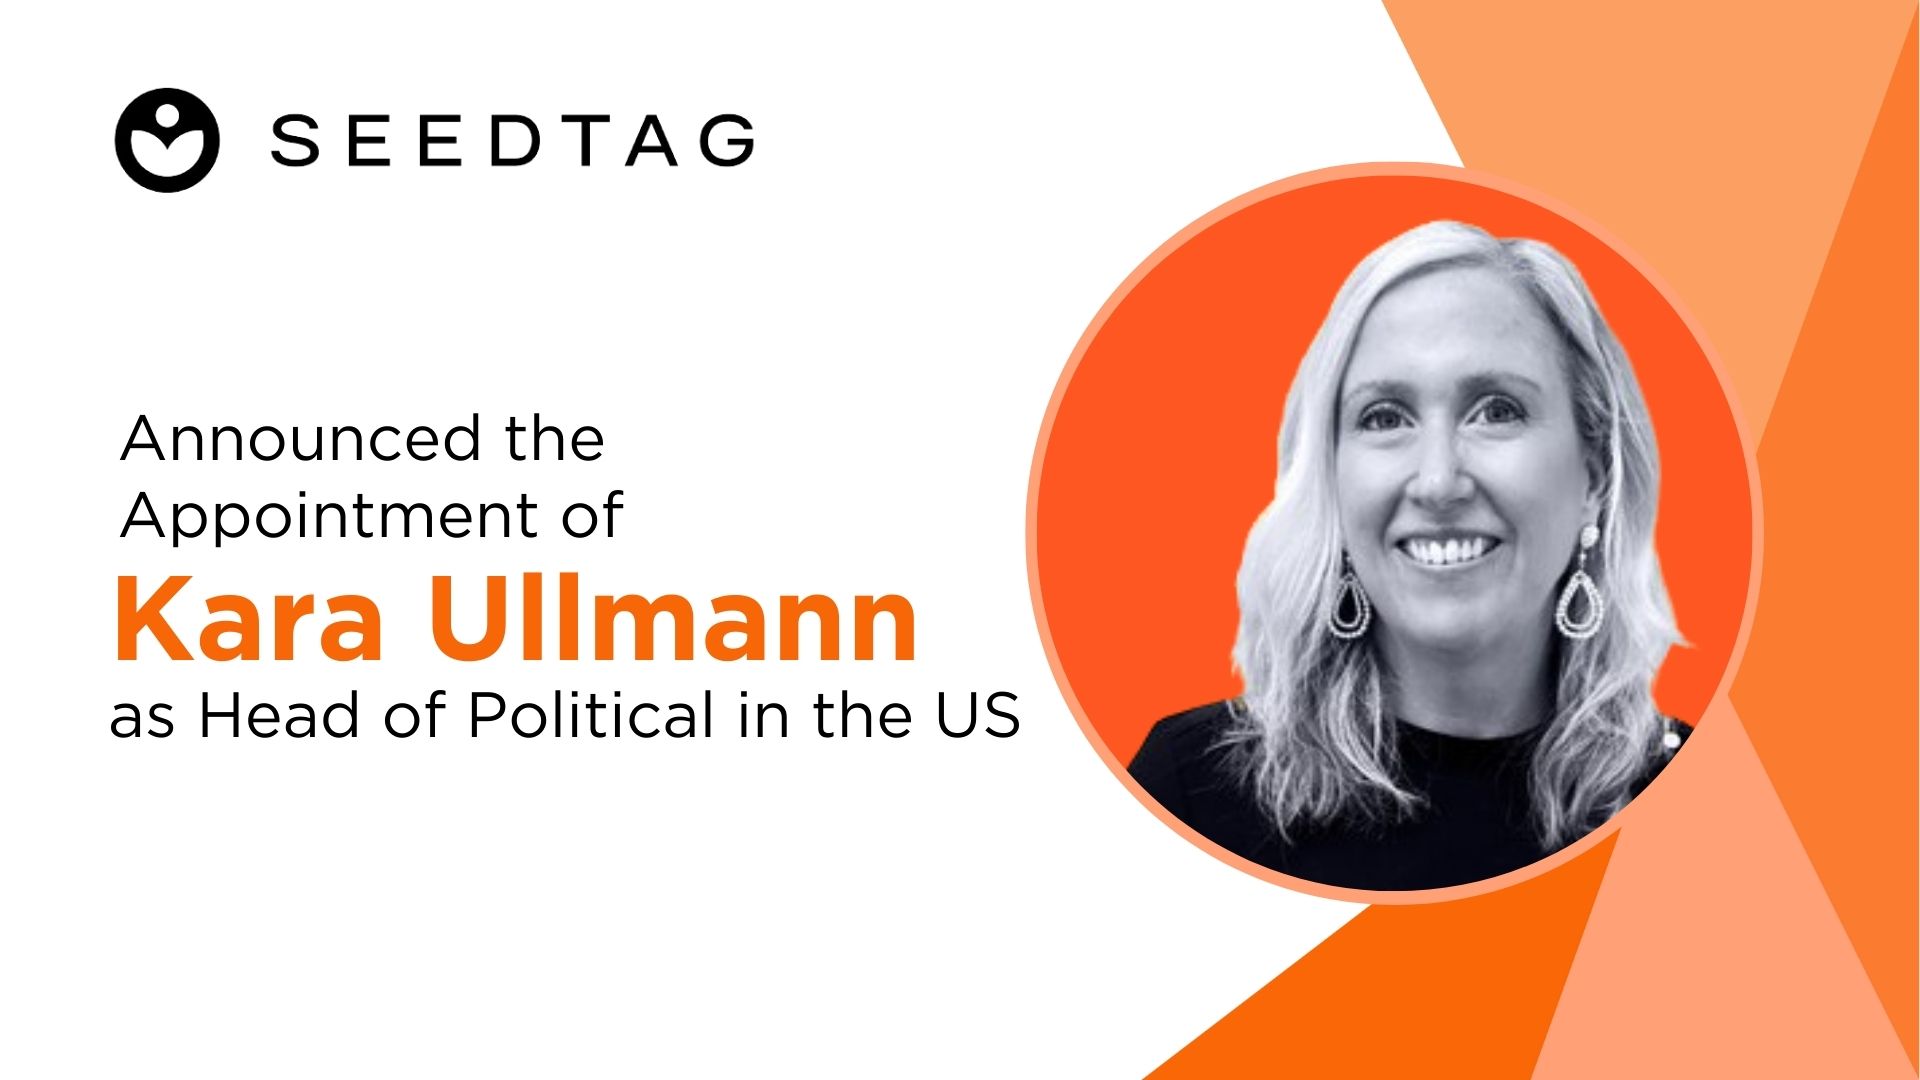 Seedtag Appoints Kara Ullmann as Head of Political in the US to Drive Contextual Advertising Innovation